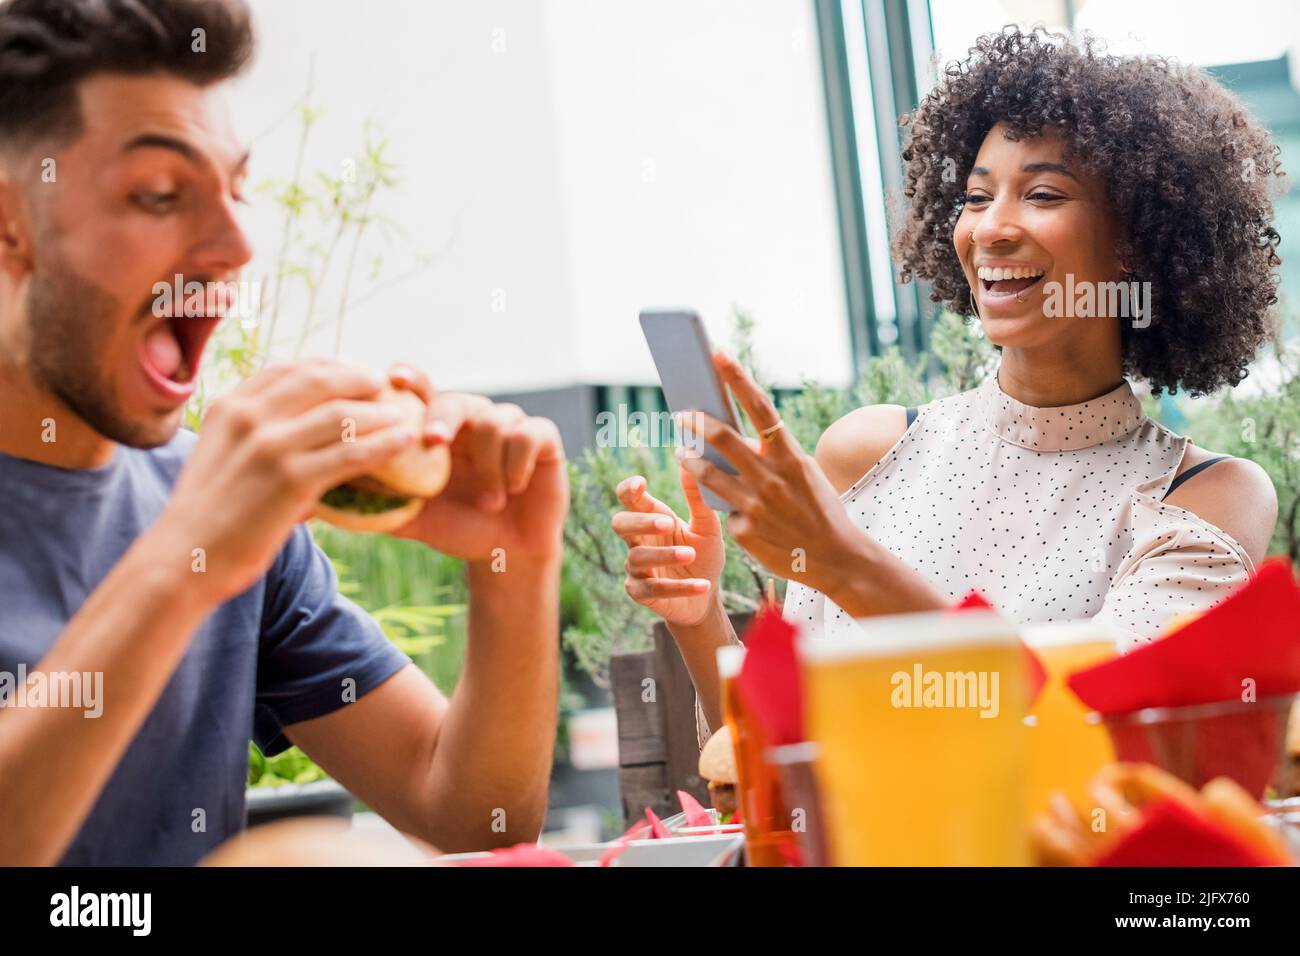 Young couple enjoying themselves eating fast food at a restaurant table laughing as they read media on their mobile phone Stock Photo